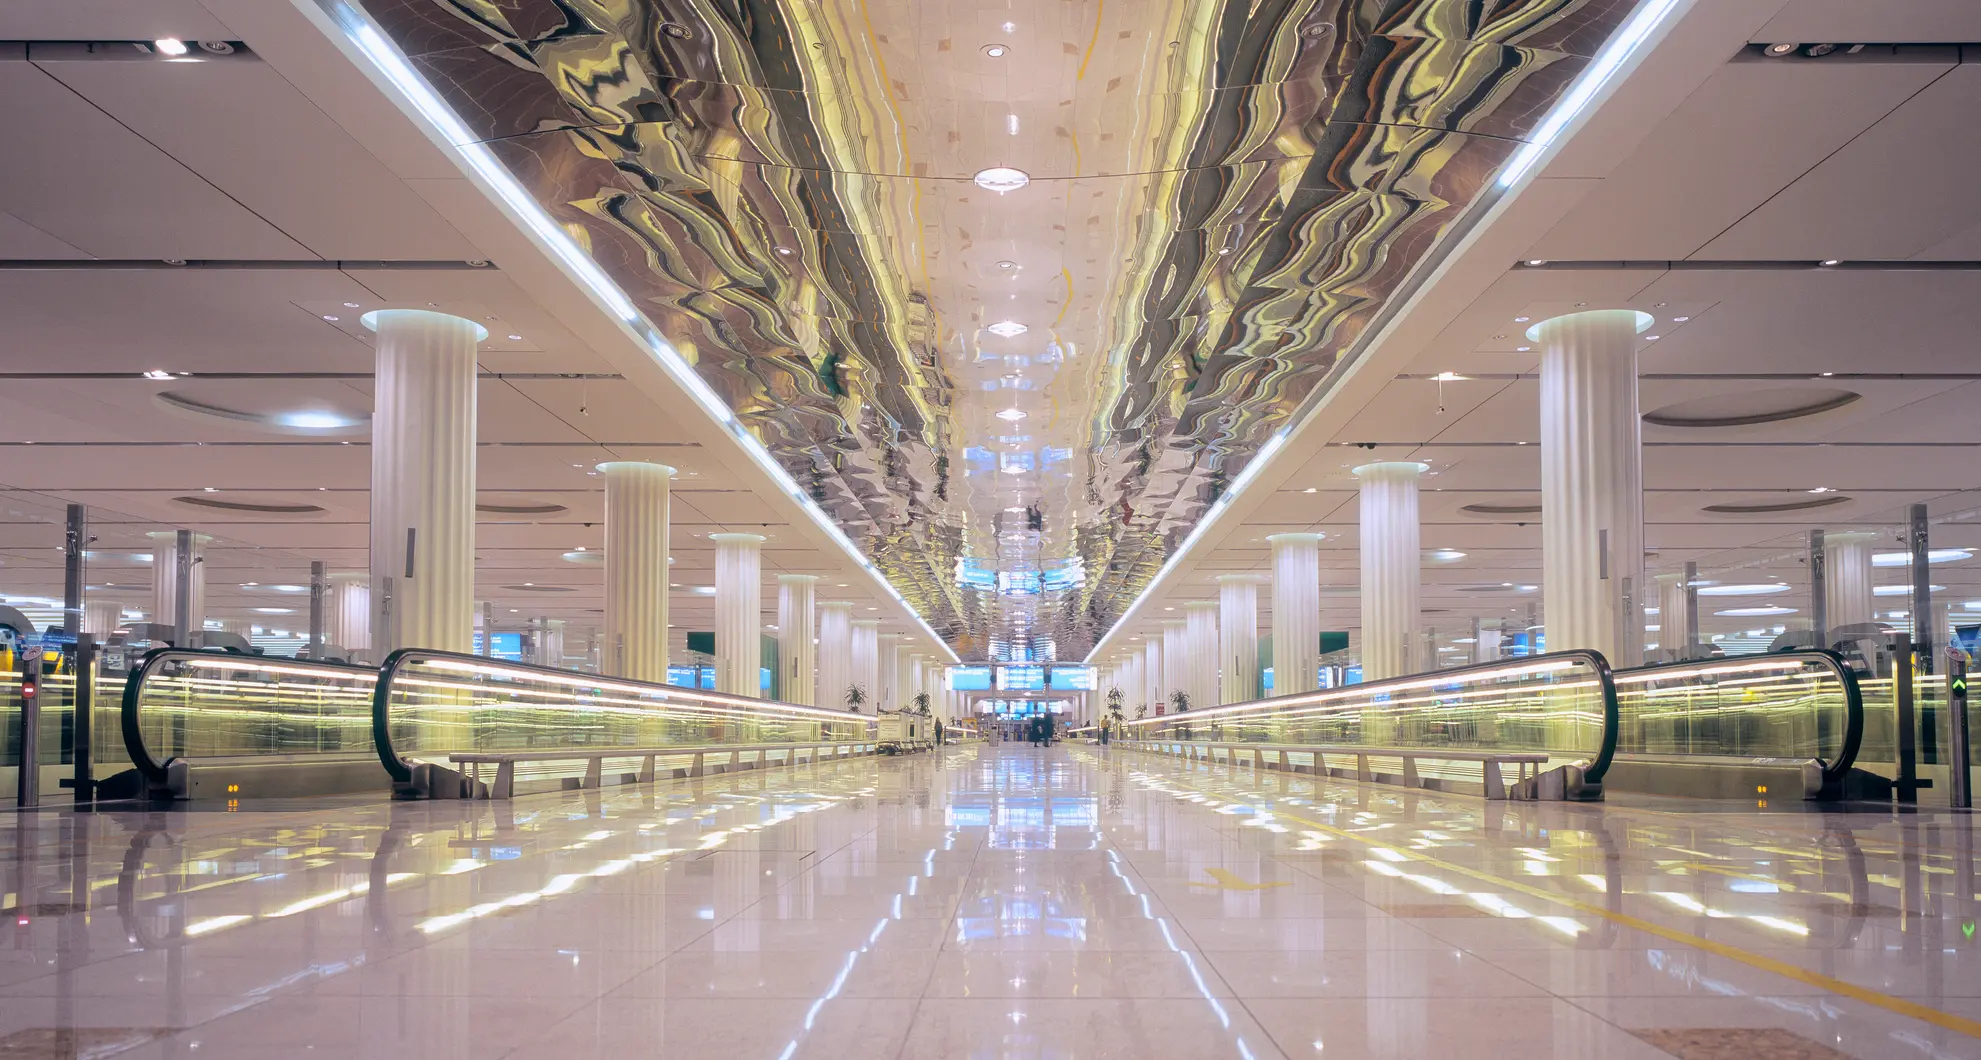 Dubai ranks among the top 5 busiest airports in the world